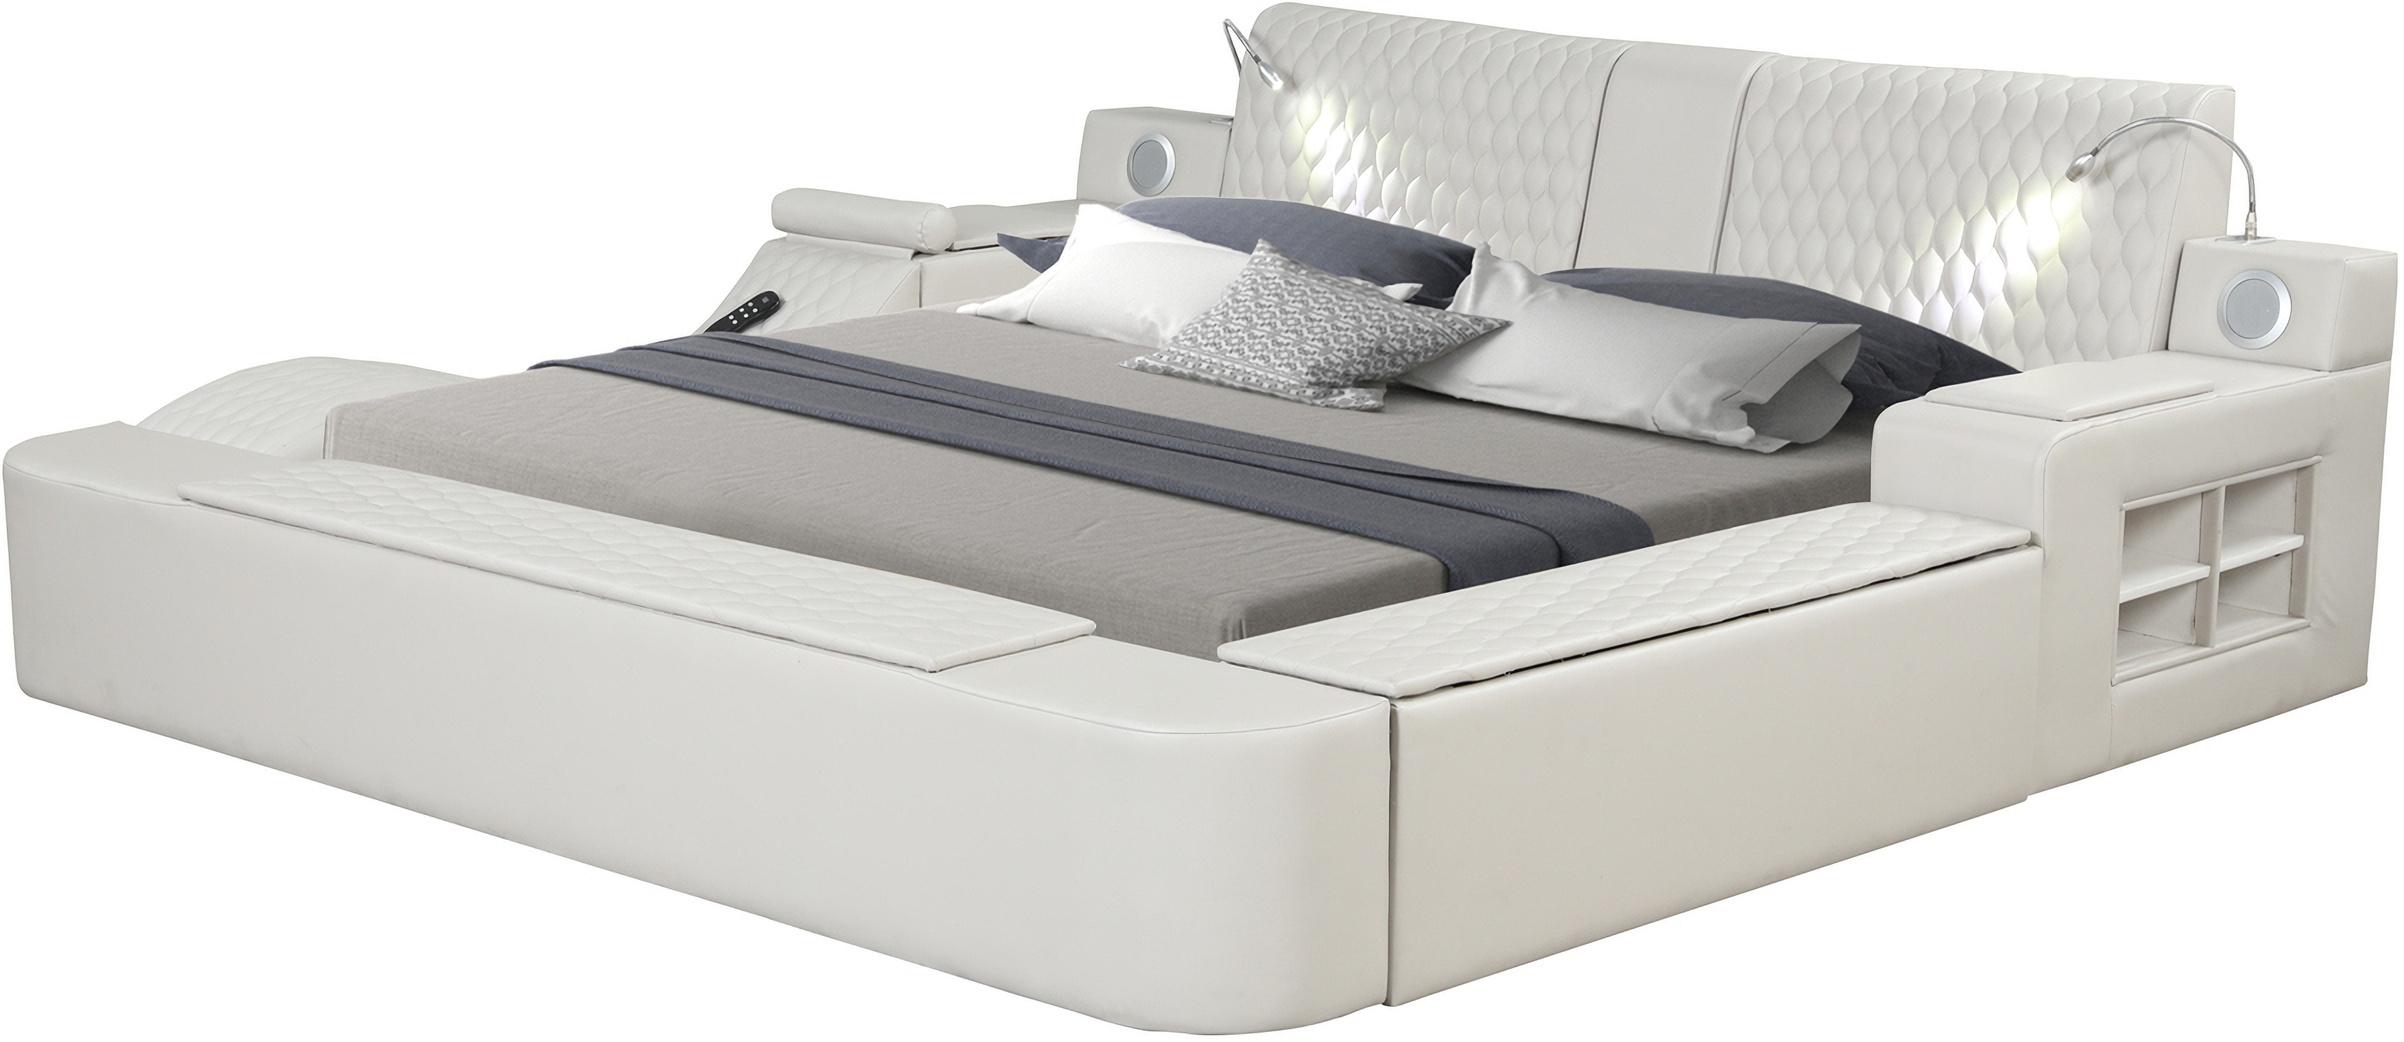 

    
Ice Eco Leather Smart Multifunctional Queen Bed ZOYA Galaxy Home Contemporary
